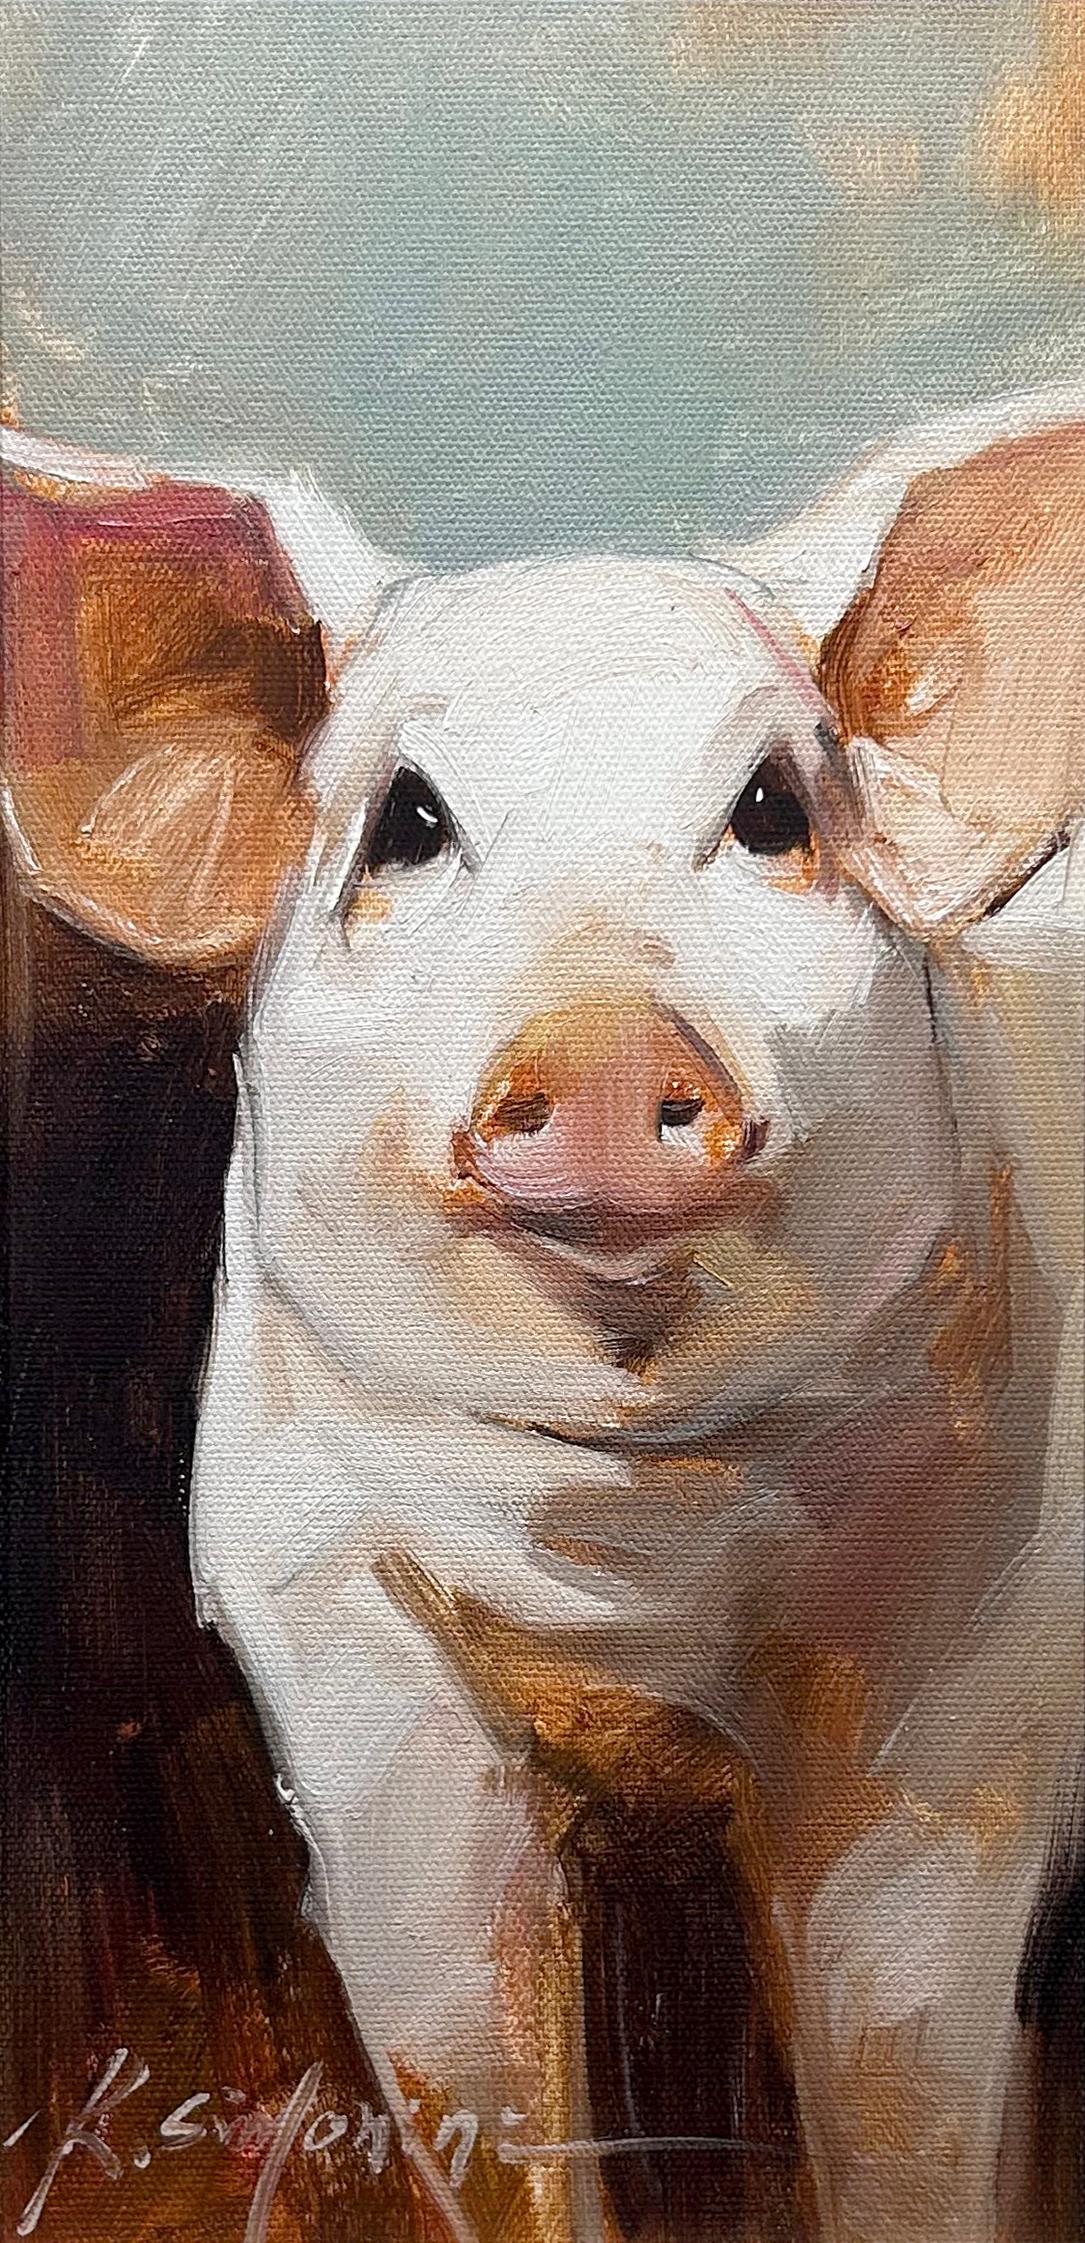 This painting by artist Ray Simonini titled "Emmett" is a 16x8 farm animal oil painting on canvas featuring a portrait of a pink pig against a colorful background. 

About the artist:
Simonini was born in China in 1981. He became intrigued by